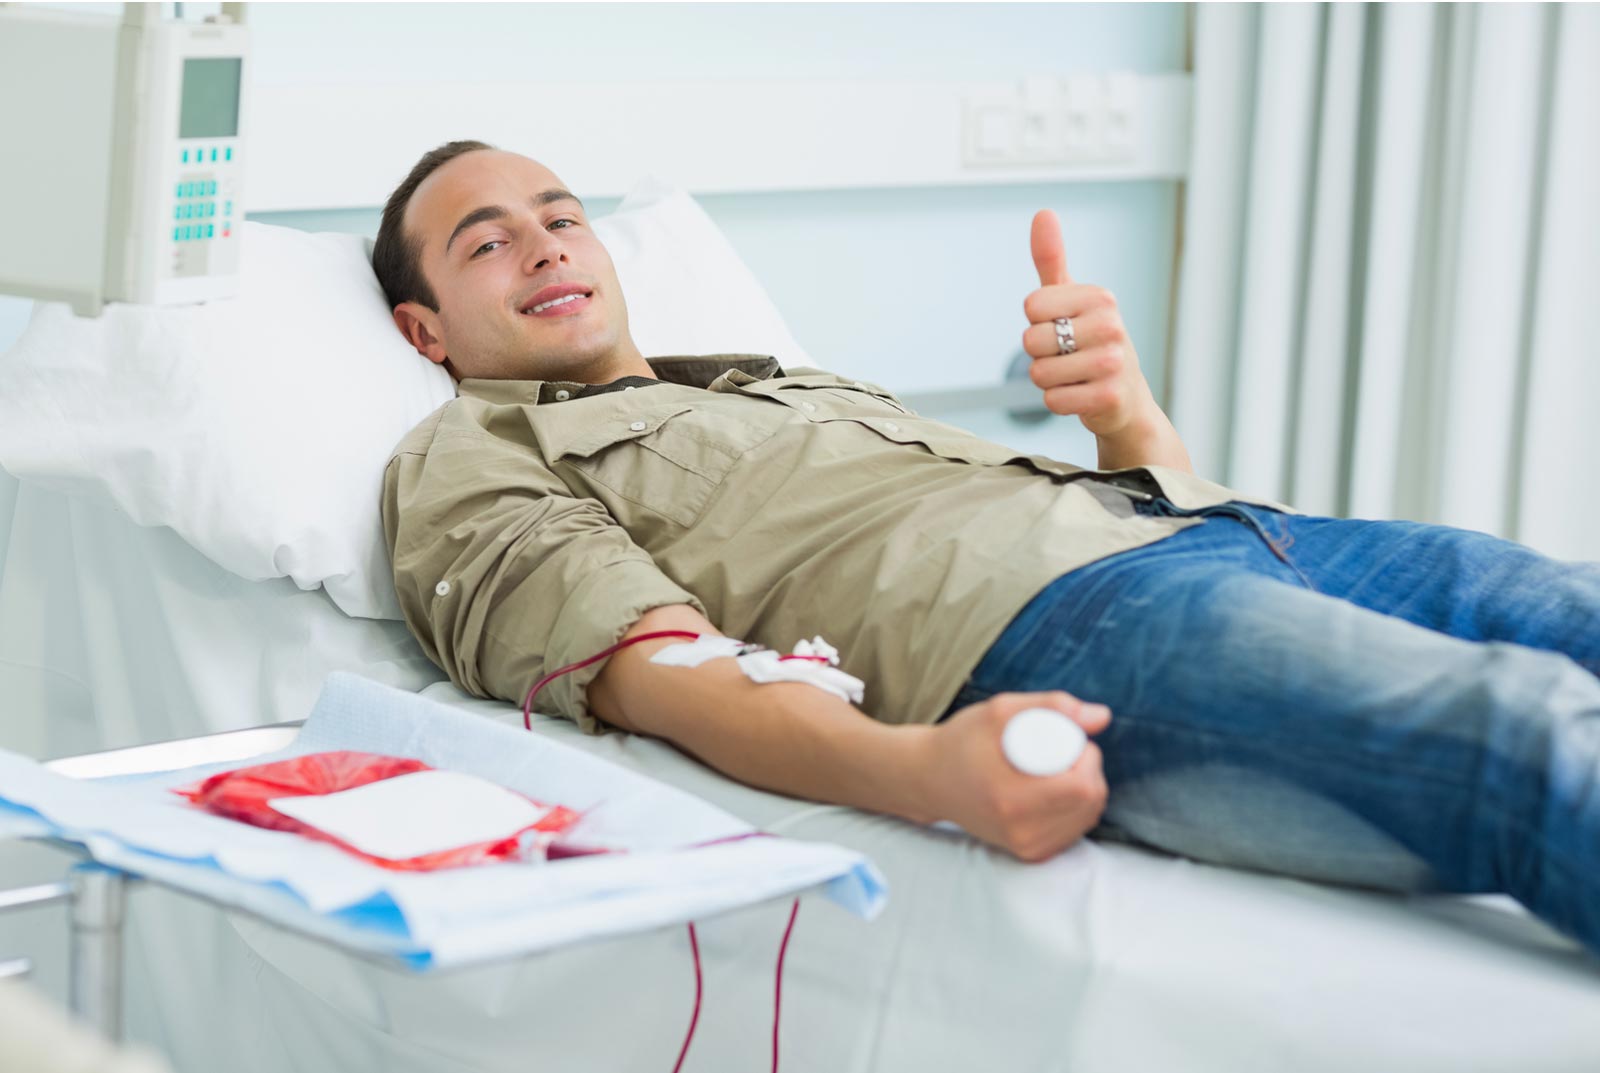 Blood Donations While Fasting: What Is Allowed?